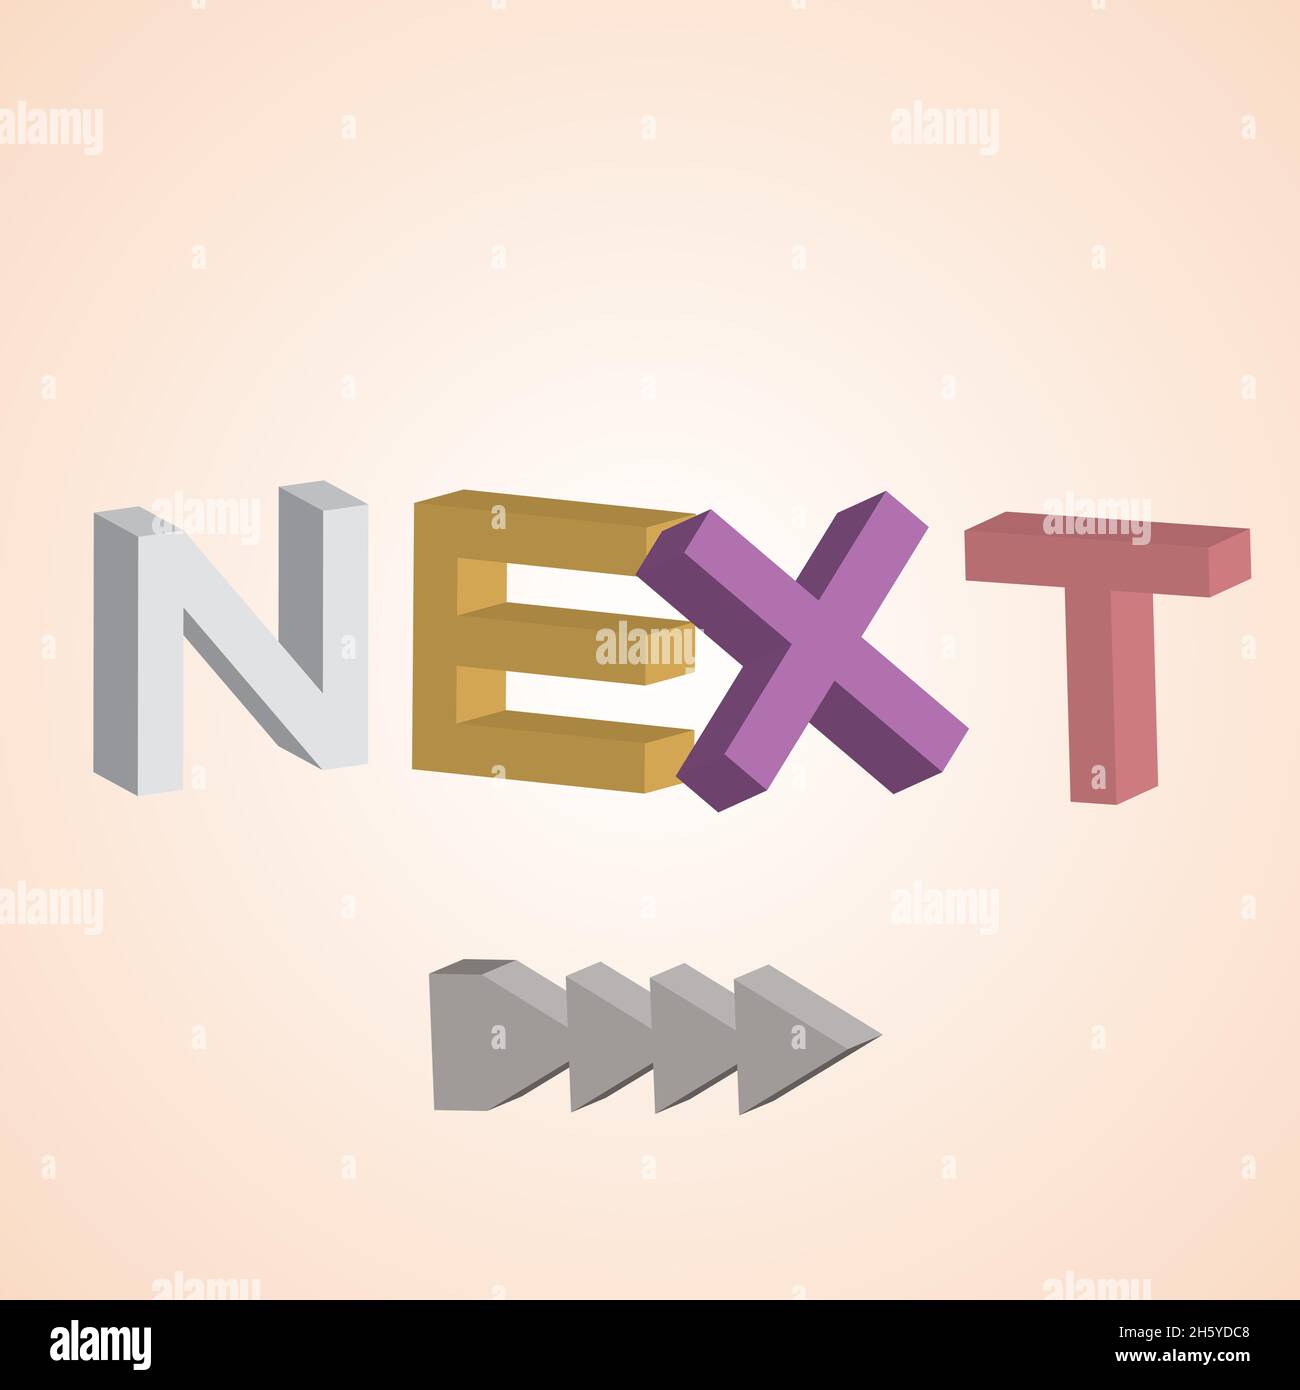 3d letters of 'next' and arrows. It can be used to indicate the next information board or direction or information. Stock Vector